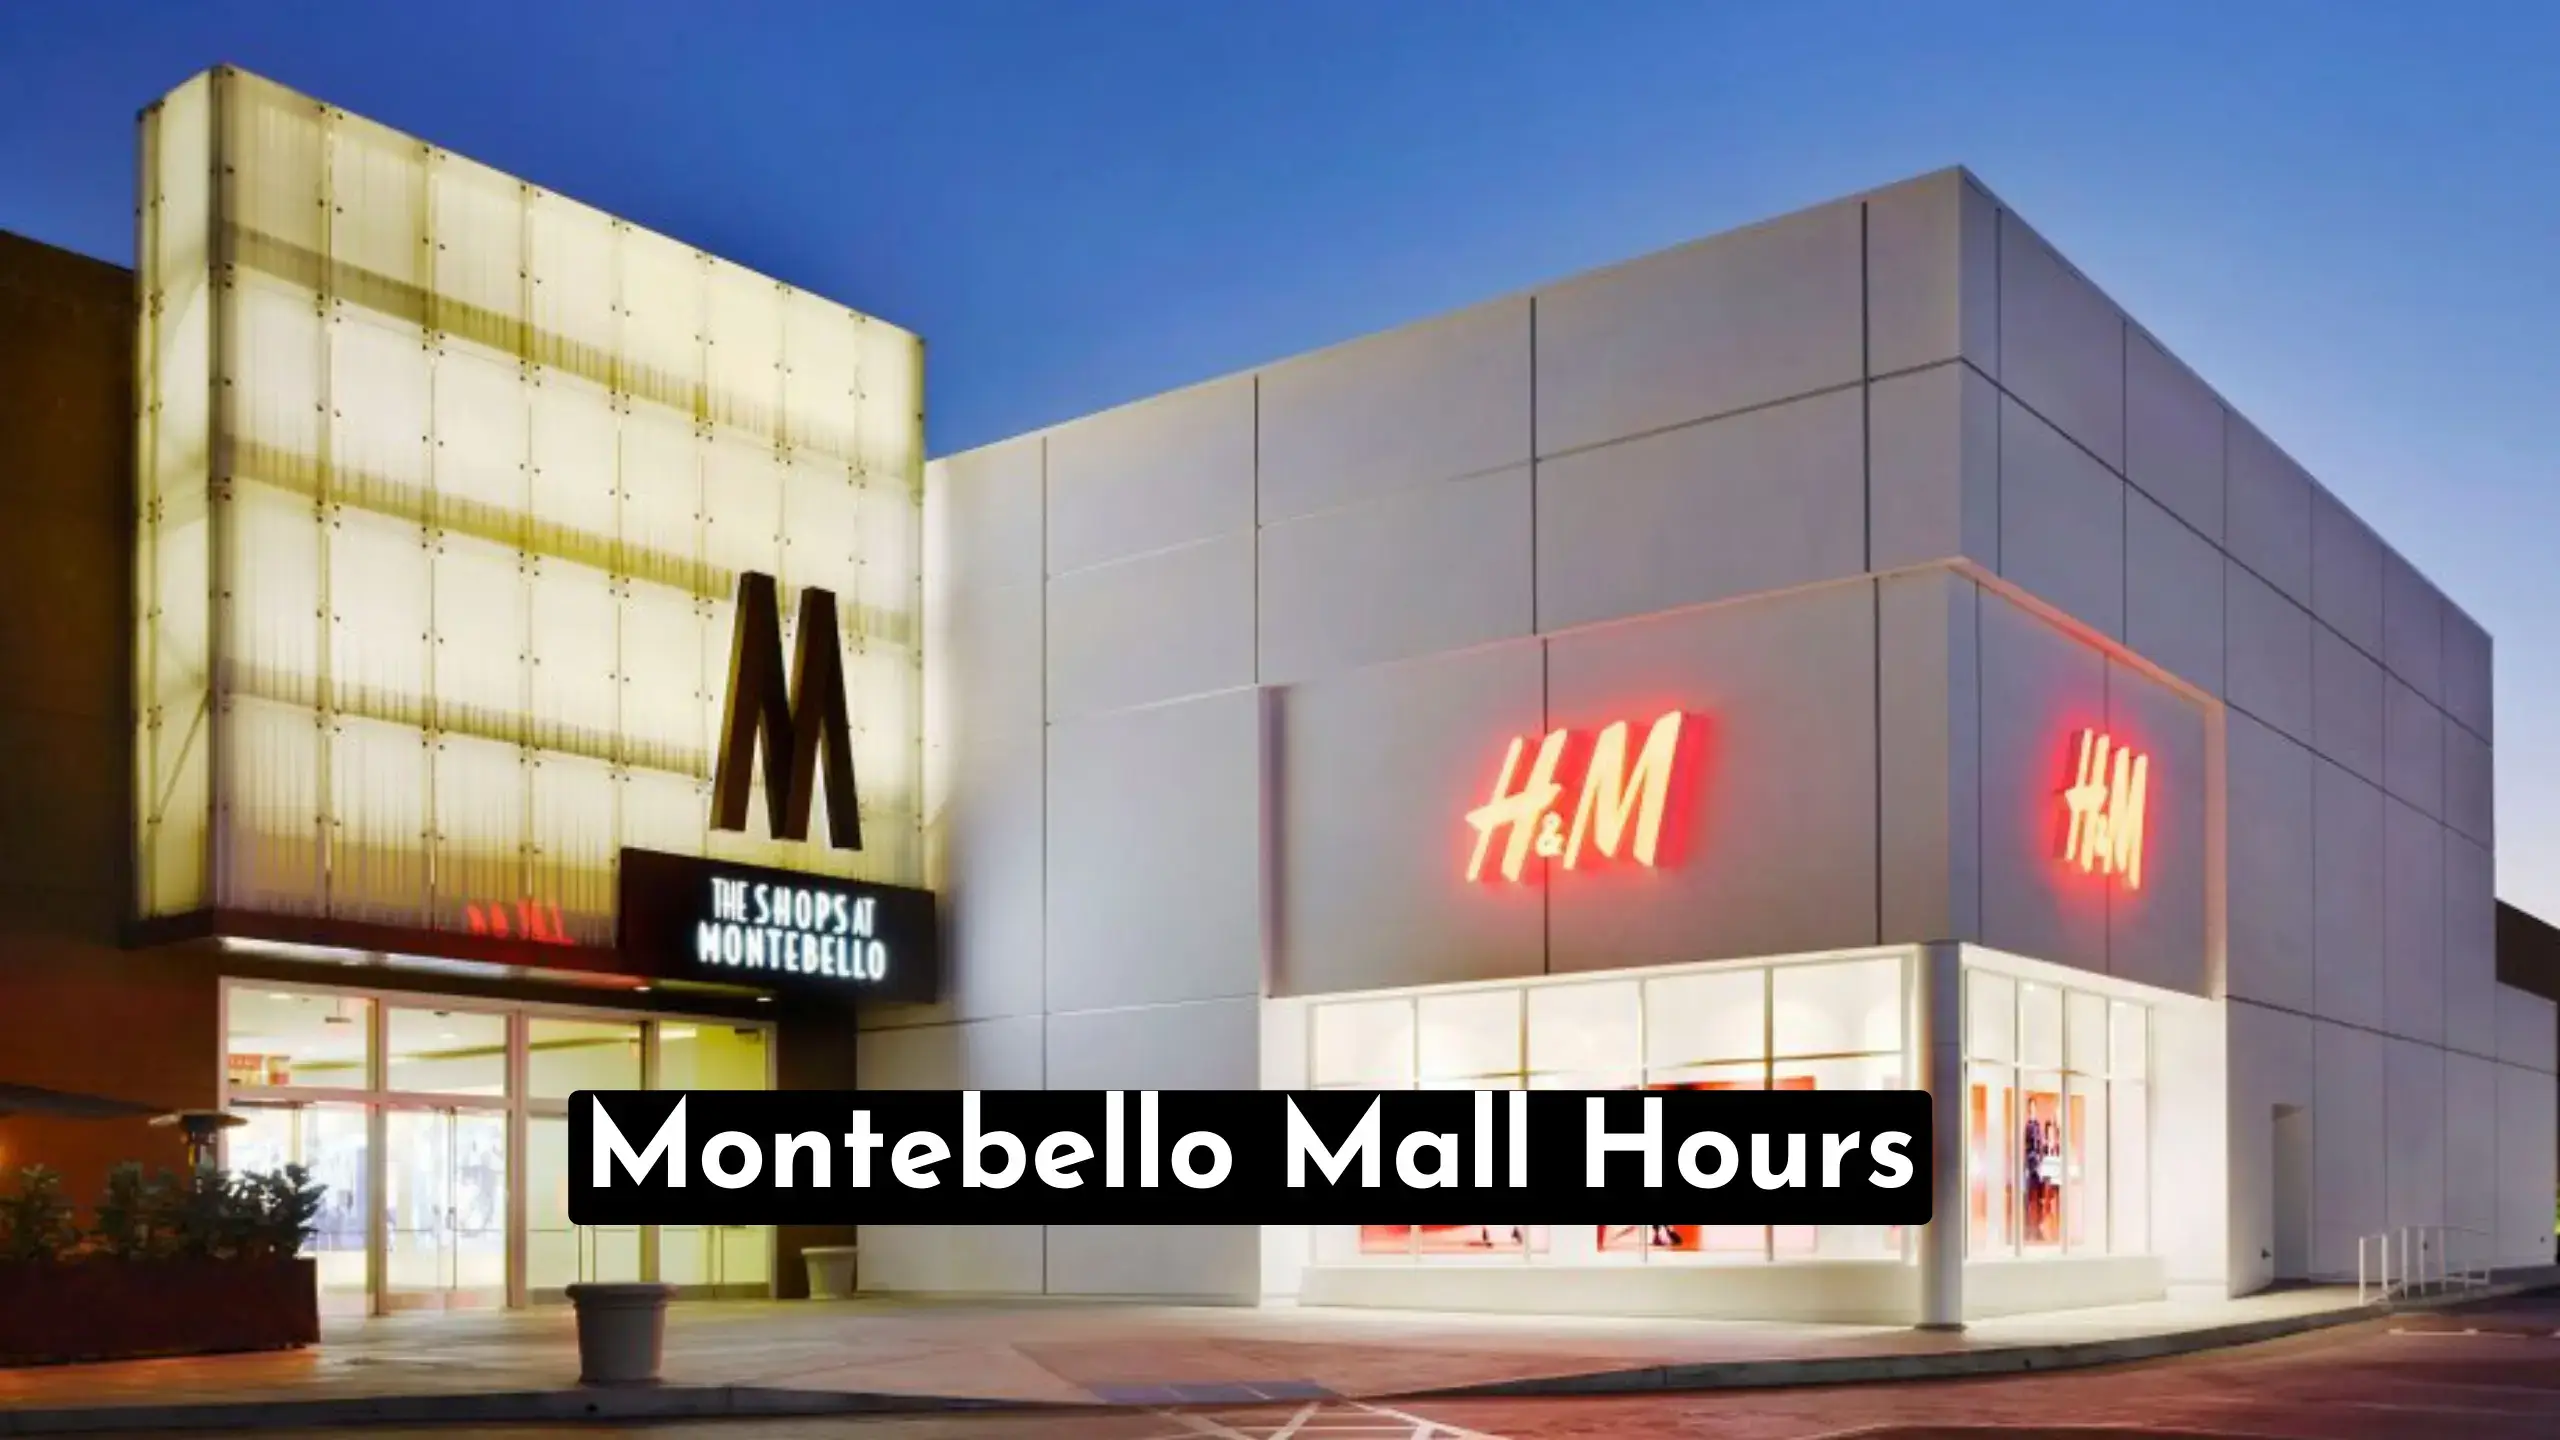 Discover the Montebello Mall Hours for your ultimate shopping experience. Explore the range of stores, services & amenities available at Mall